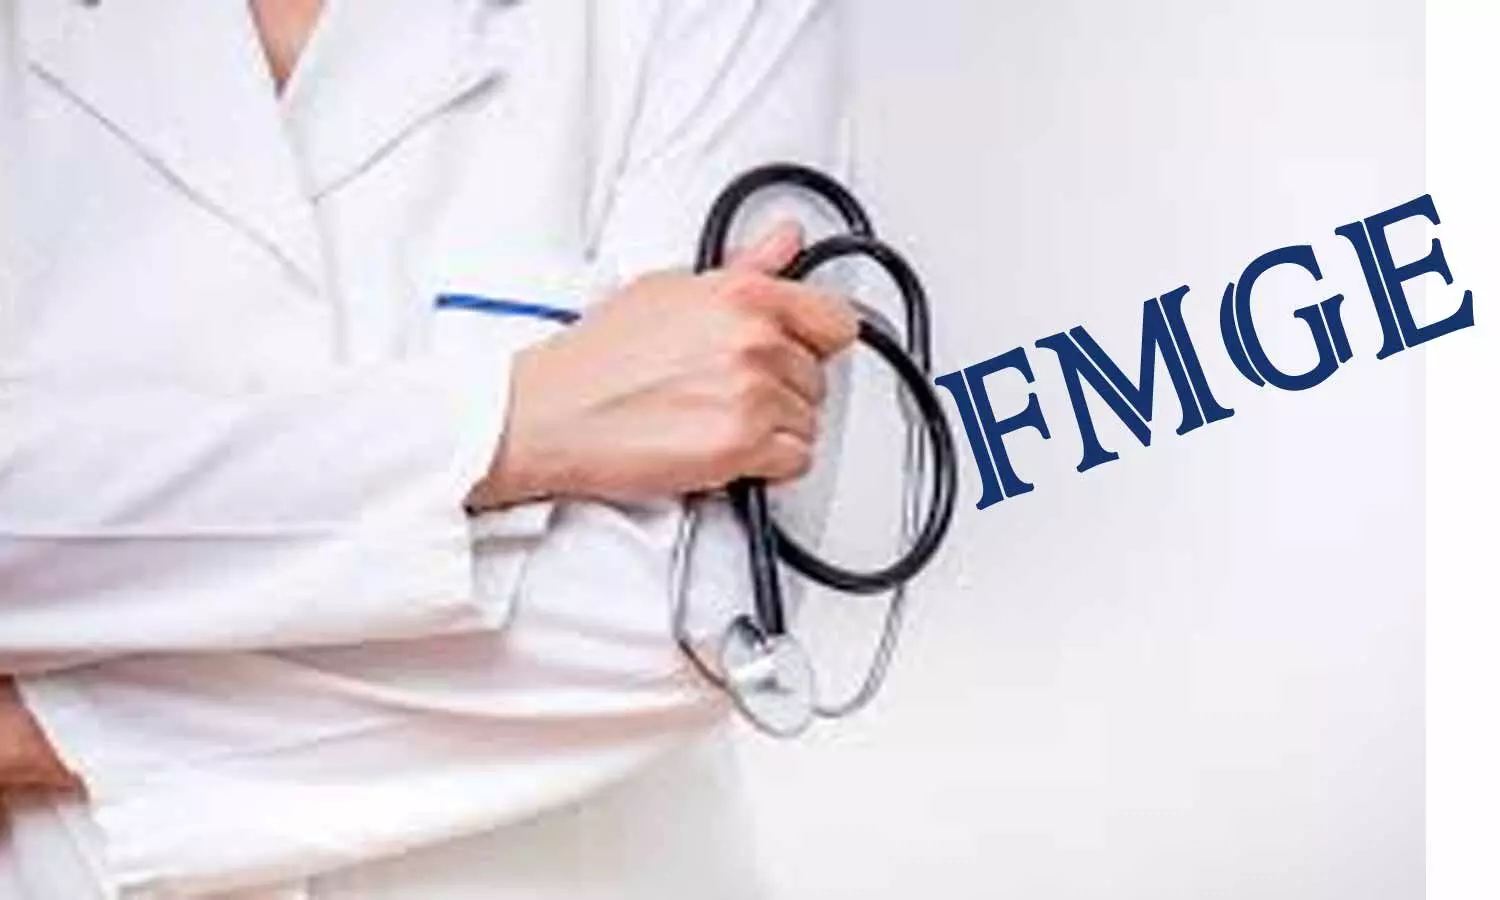 No relief on FMGE: SC declines plea asking to defer exam for foreign stuck MBBS passouts